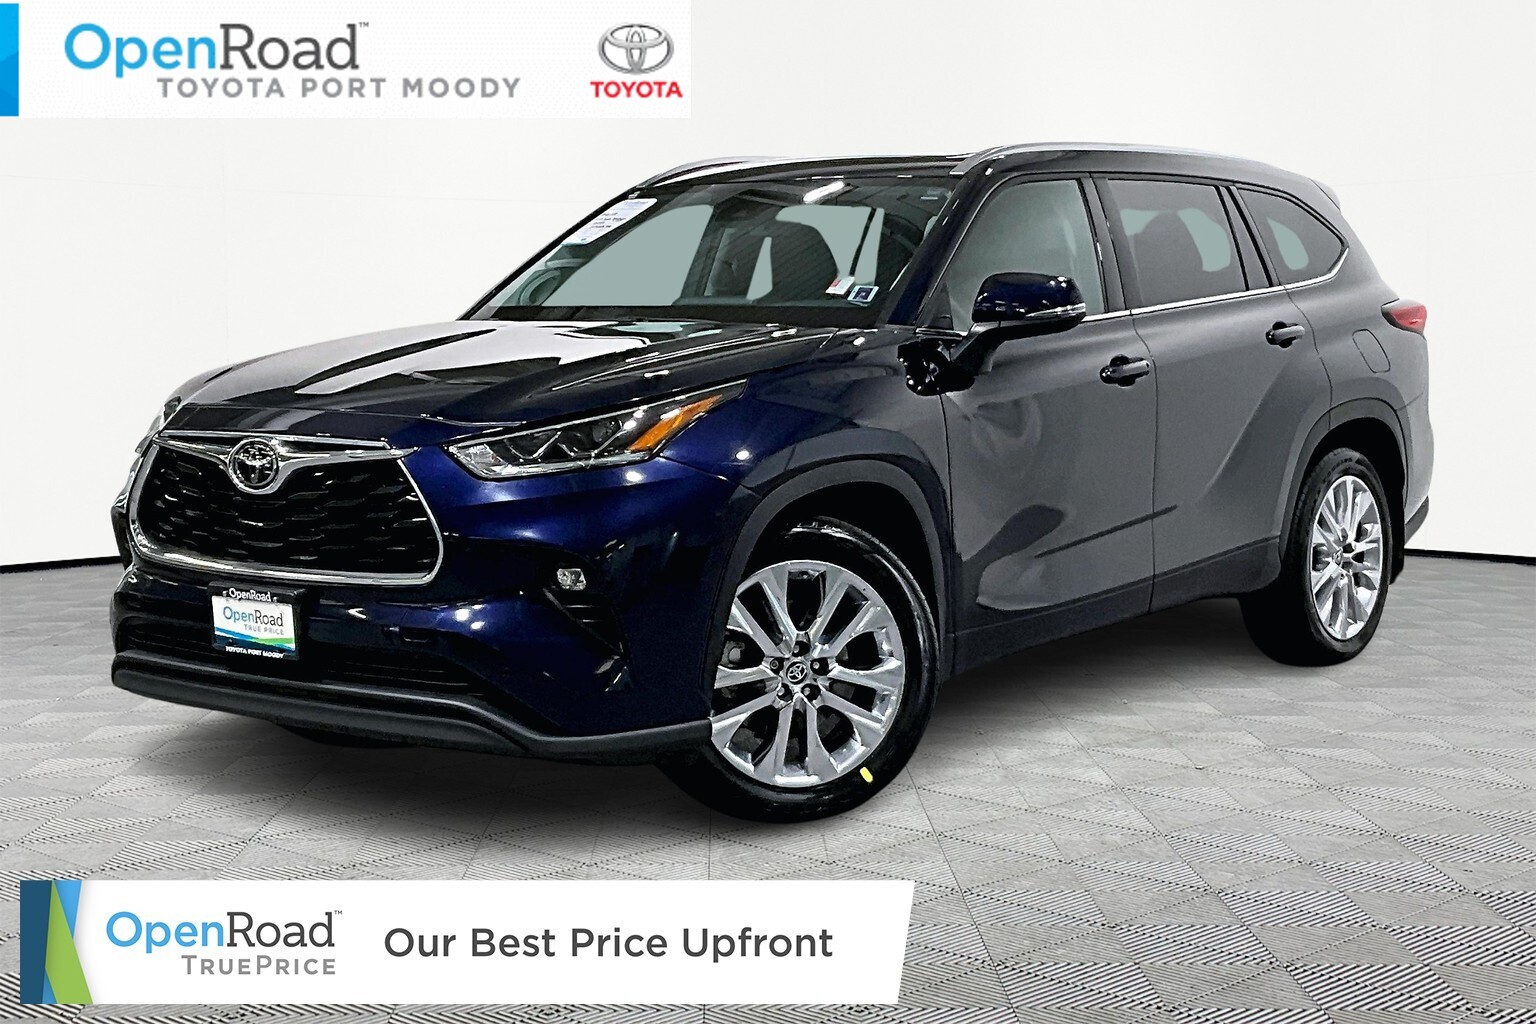 2021 Toyota Highlander Limited AWD |OpenRoad True Price |One Owner |No Cl